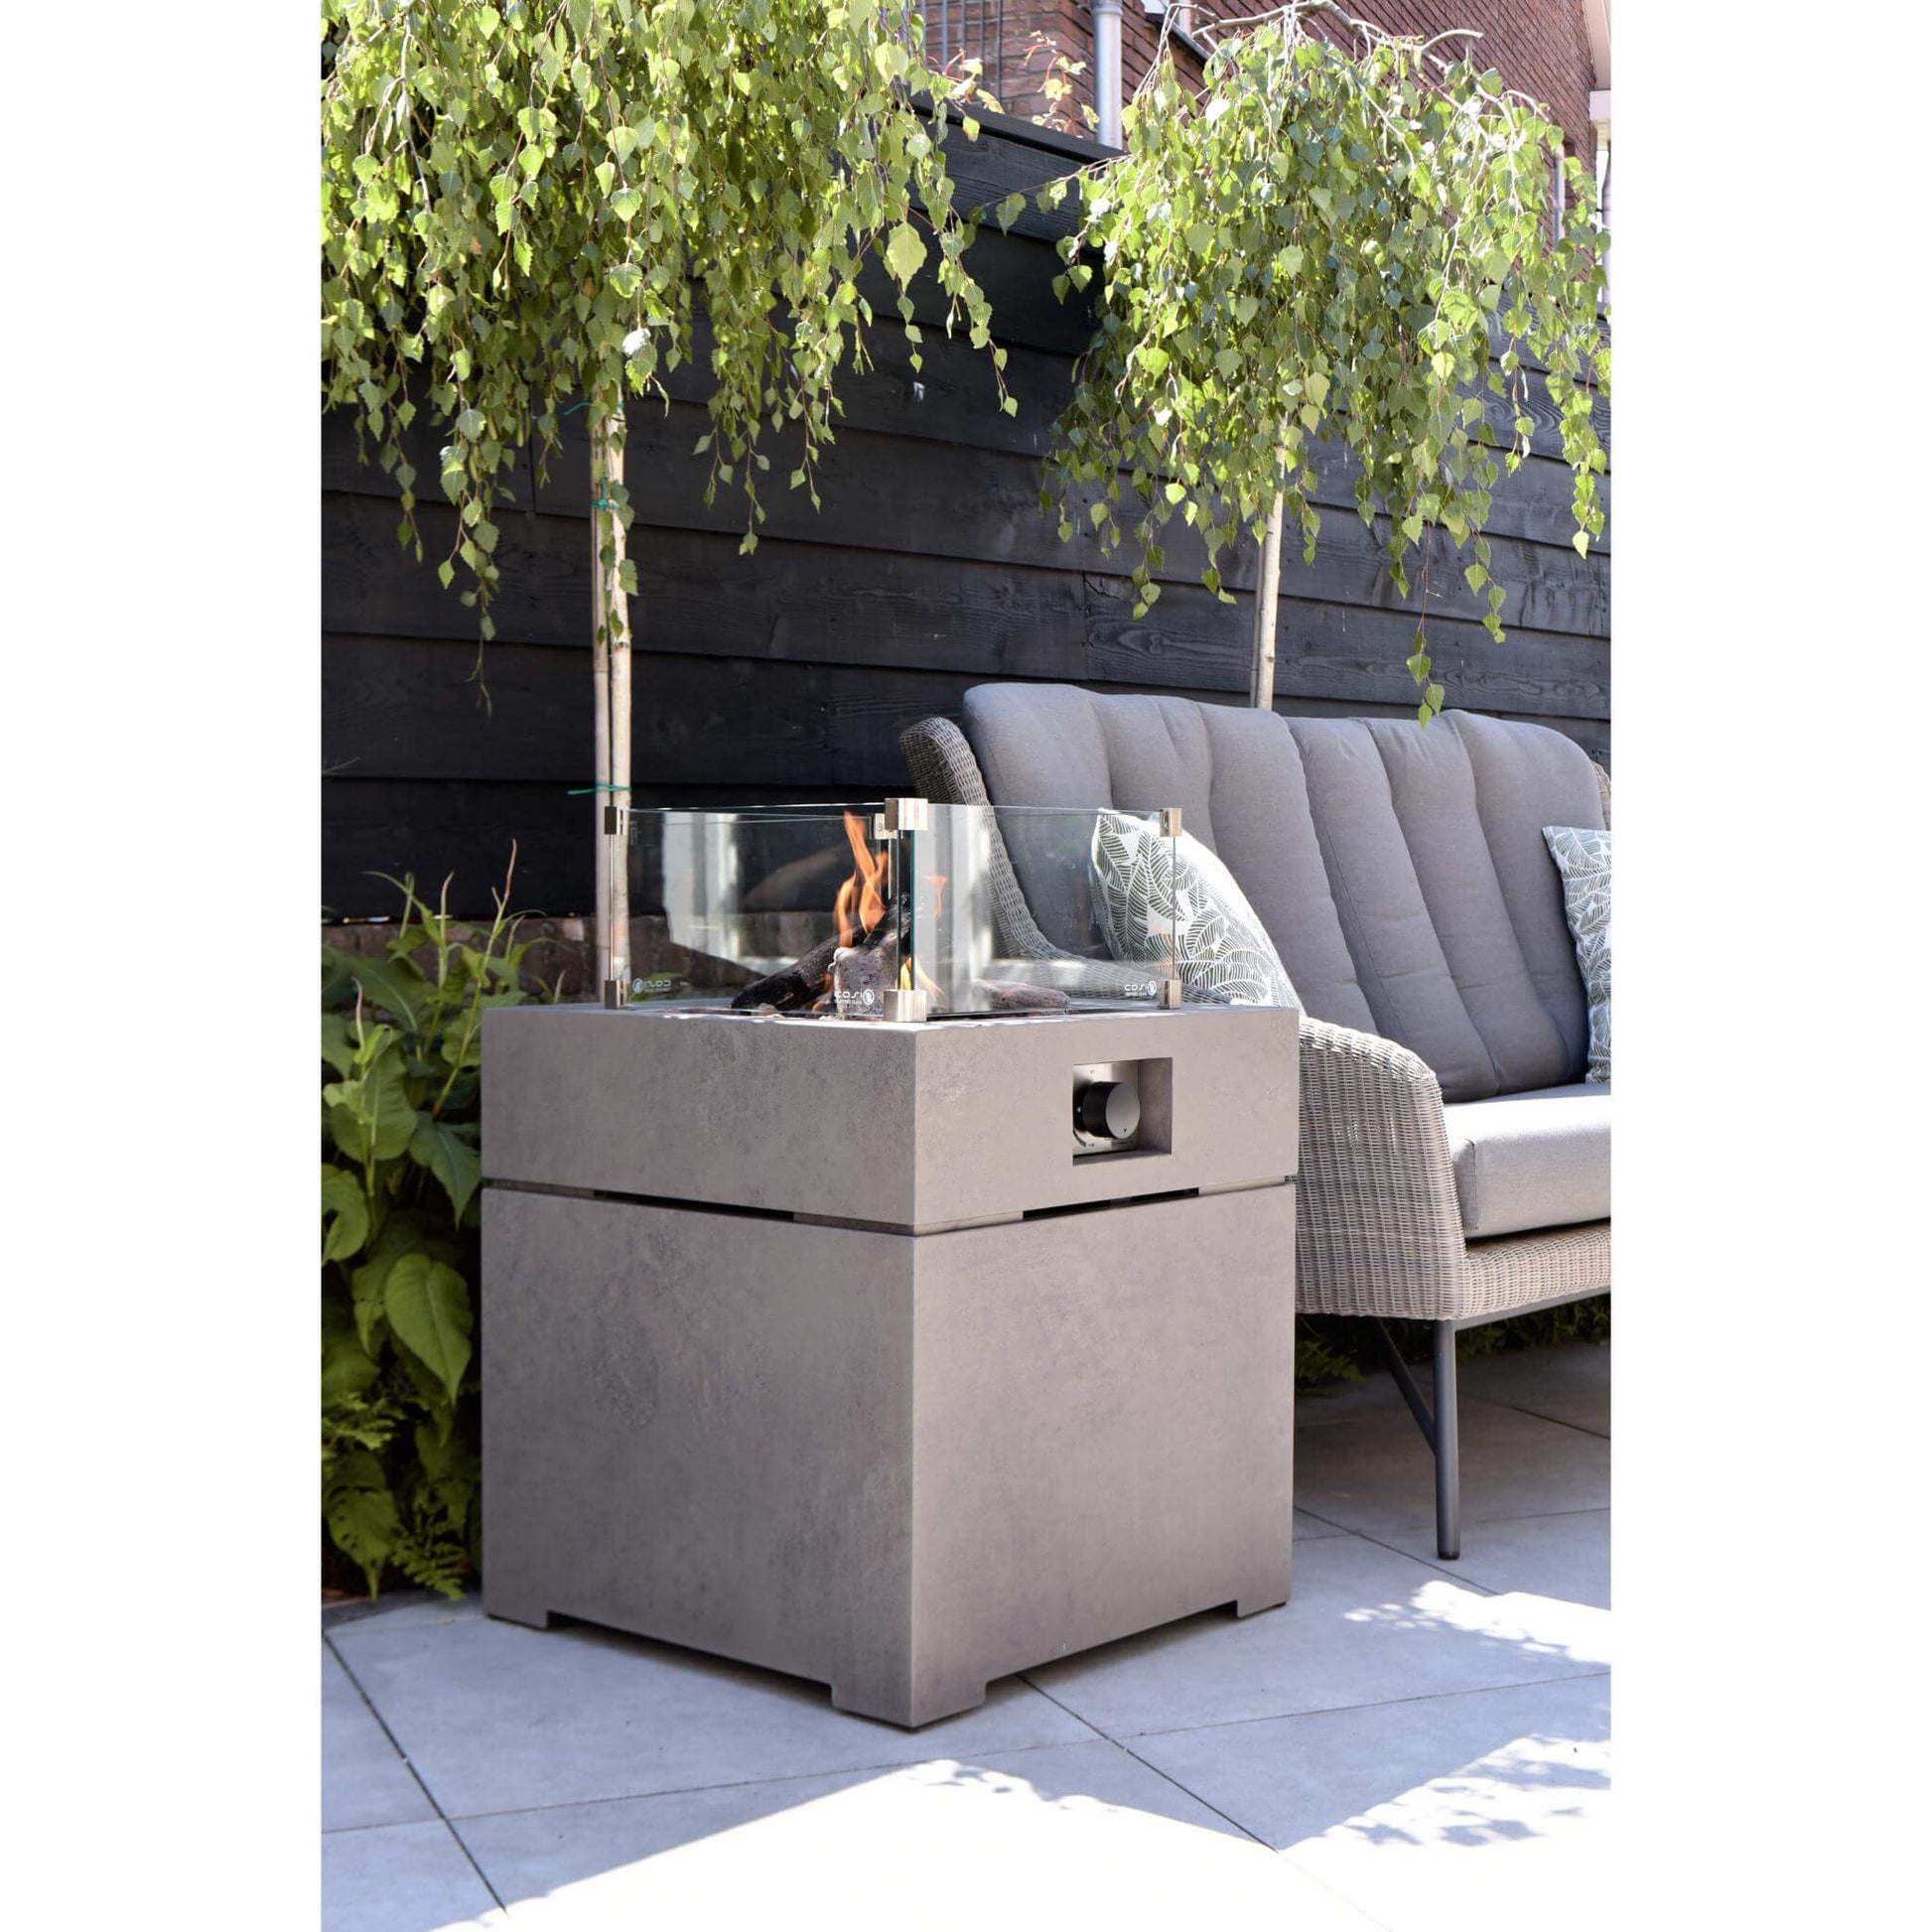 Cosibrixx 60 Concrete Effect Square Gas Fire Pit Table with lit fire and glass screen on an outdoor garden patio